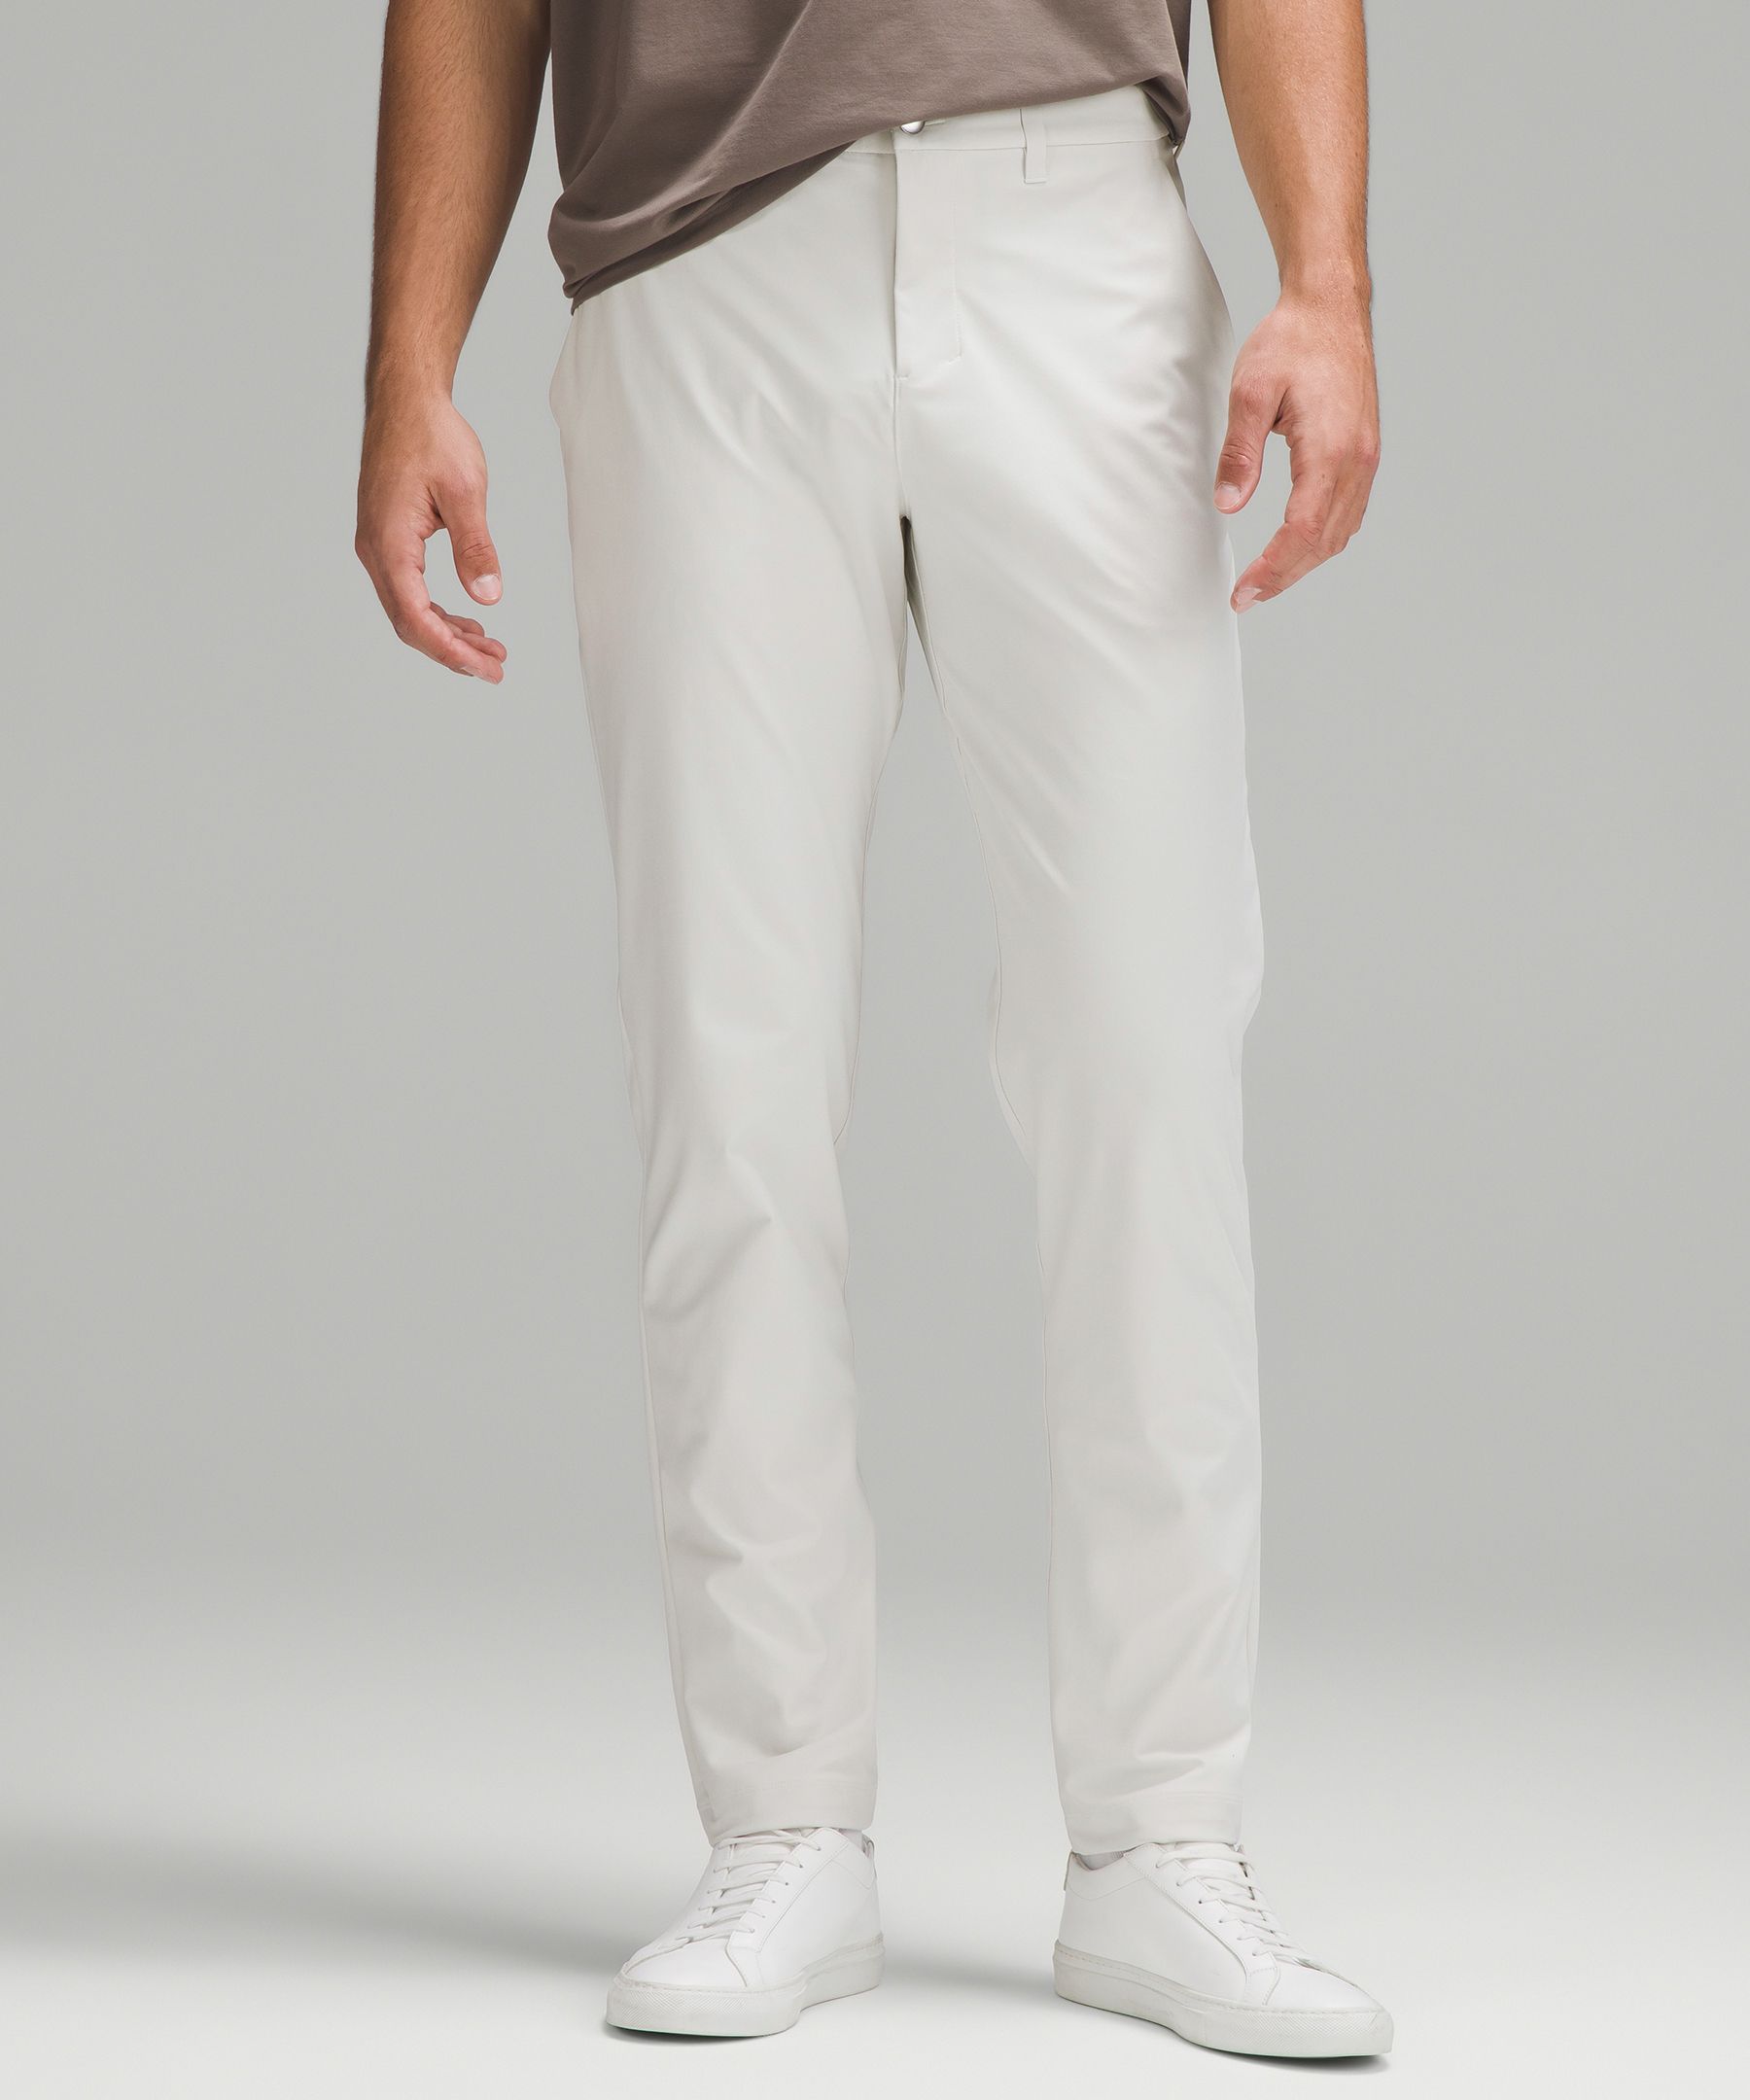 ReStock Alert: Lululemon Classic Fit Commission and ABC pants in 30″ Inseam